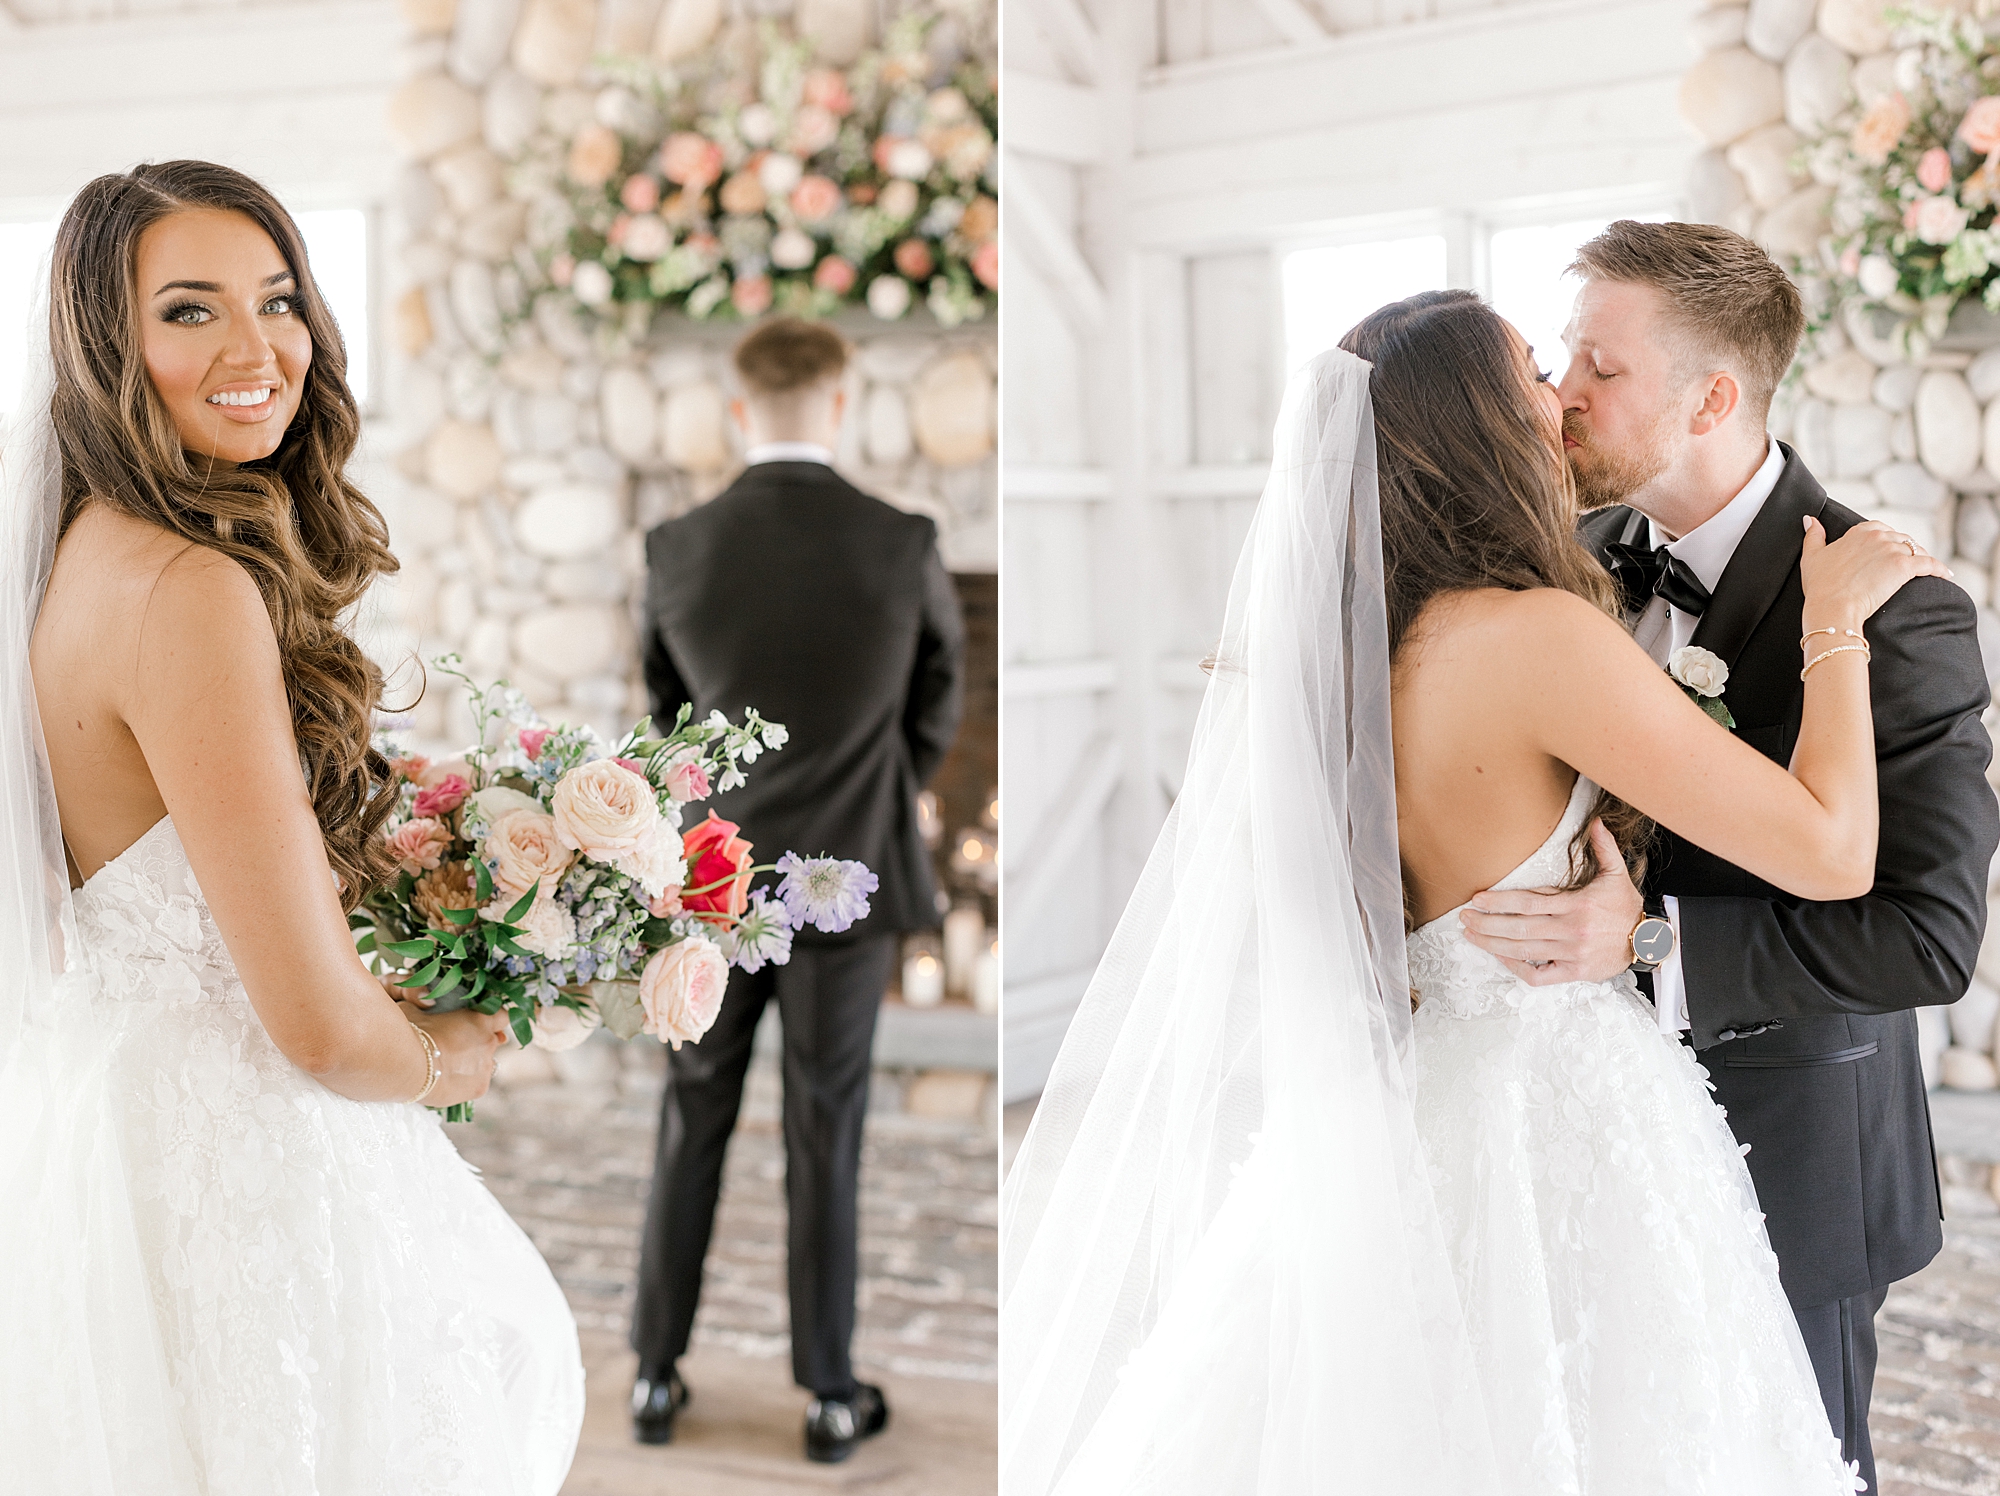 groom kisses bride during first look by stone fireplace at Bonnet Island Estate